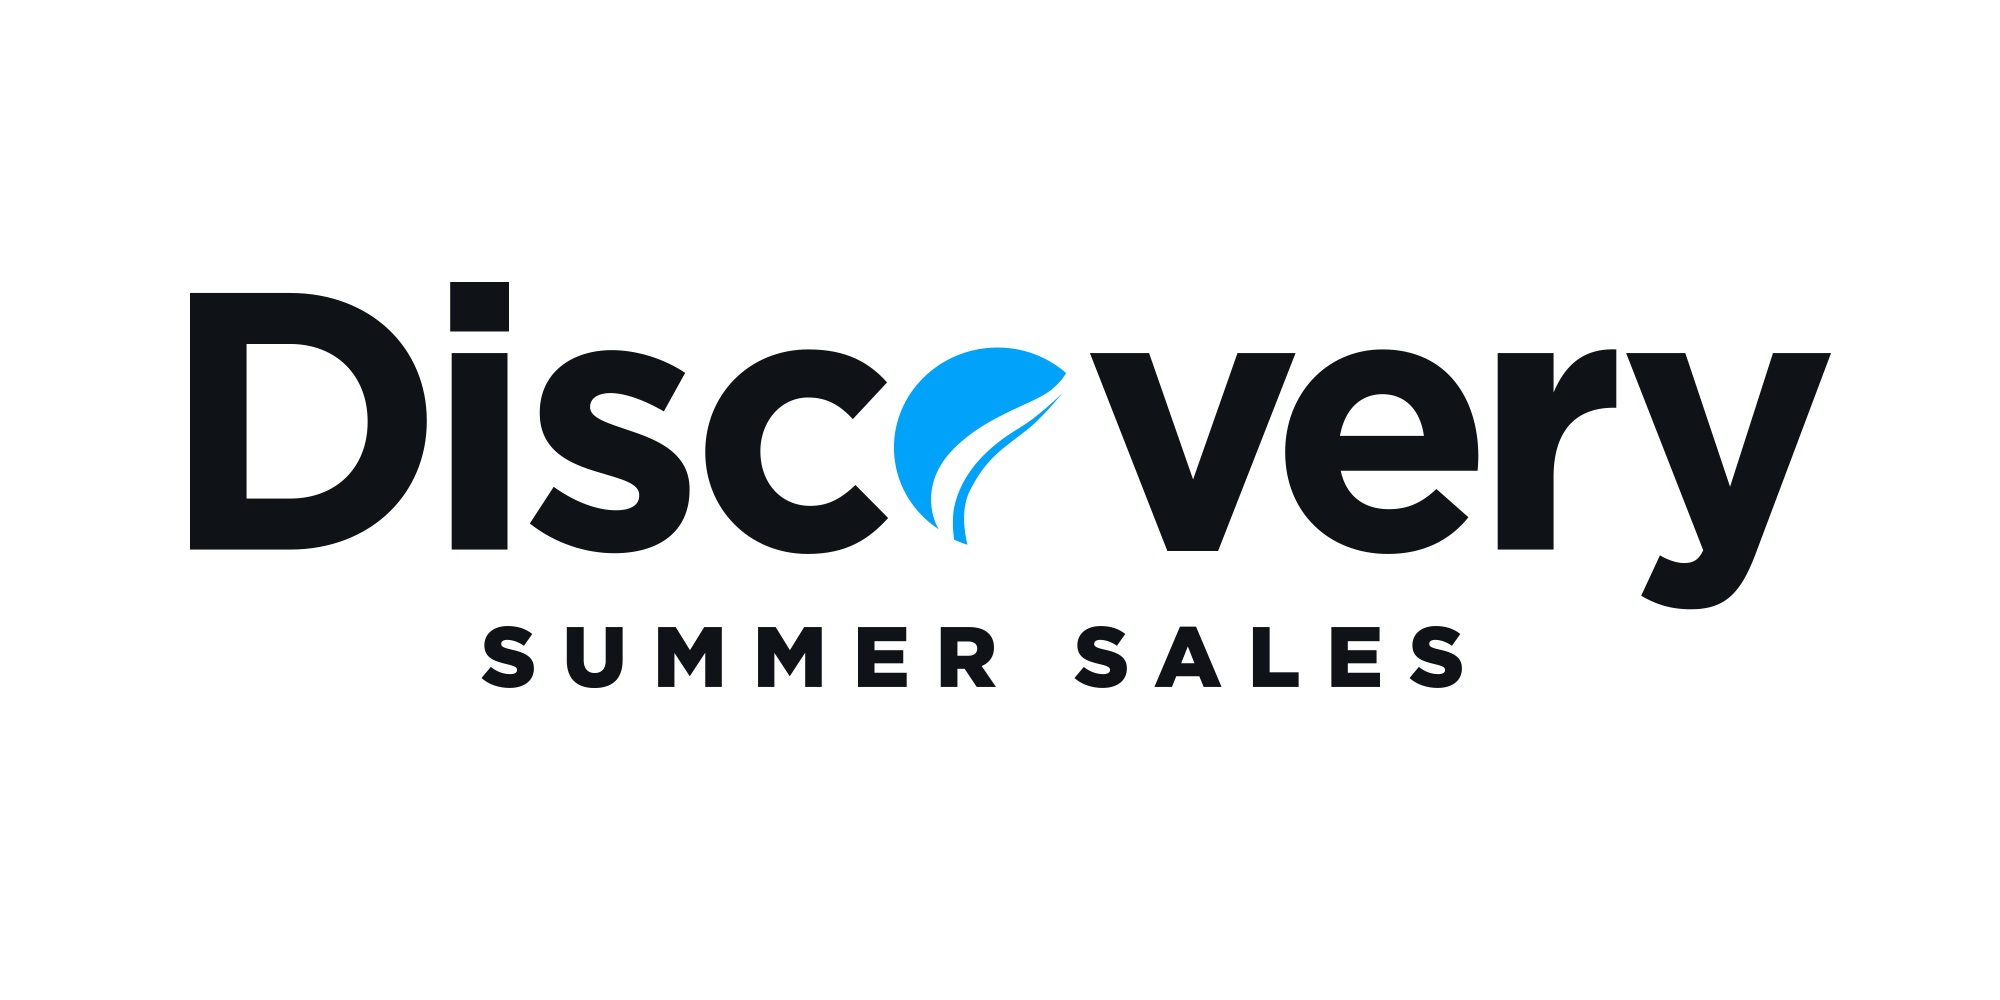 Discover Your Summer